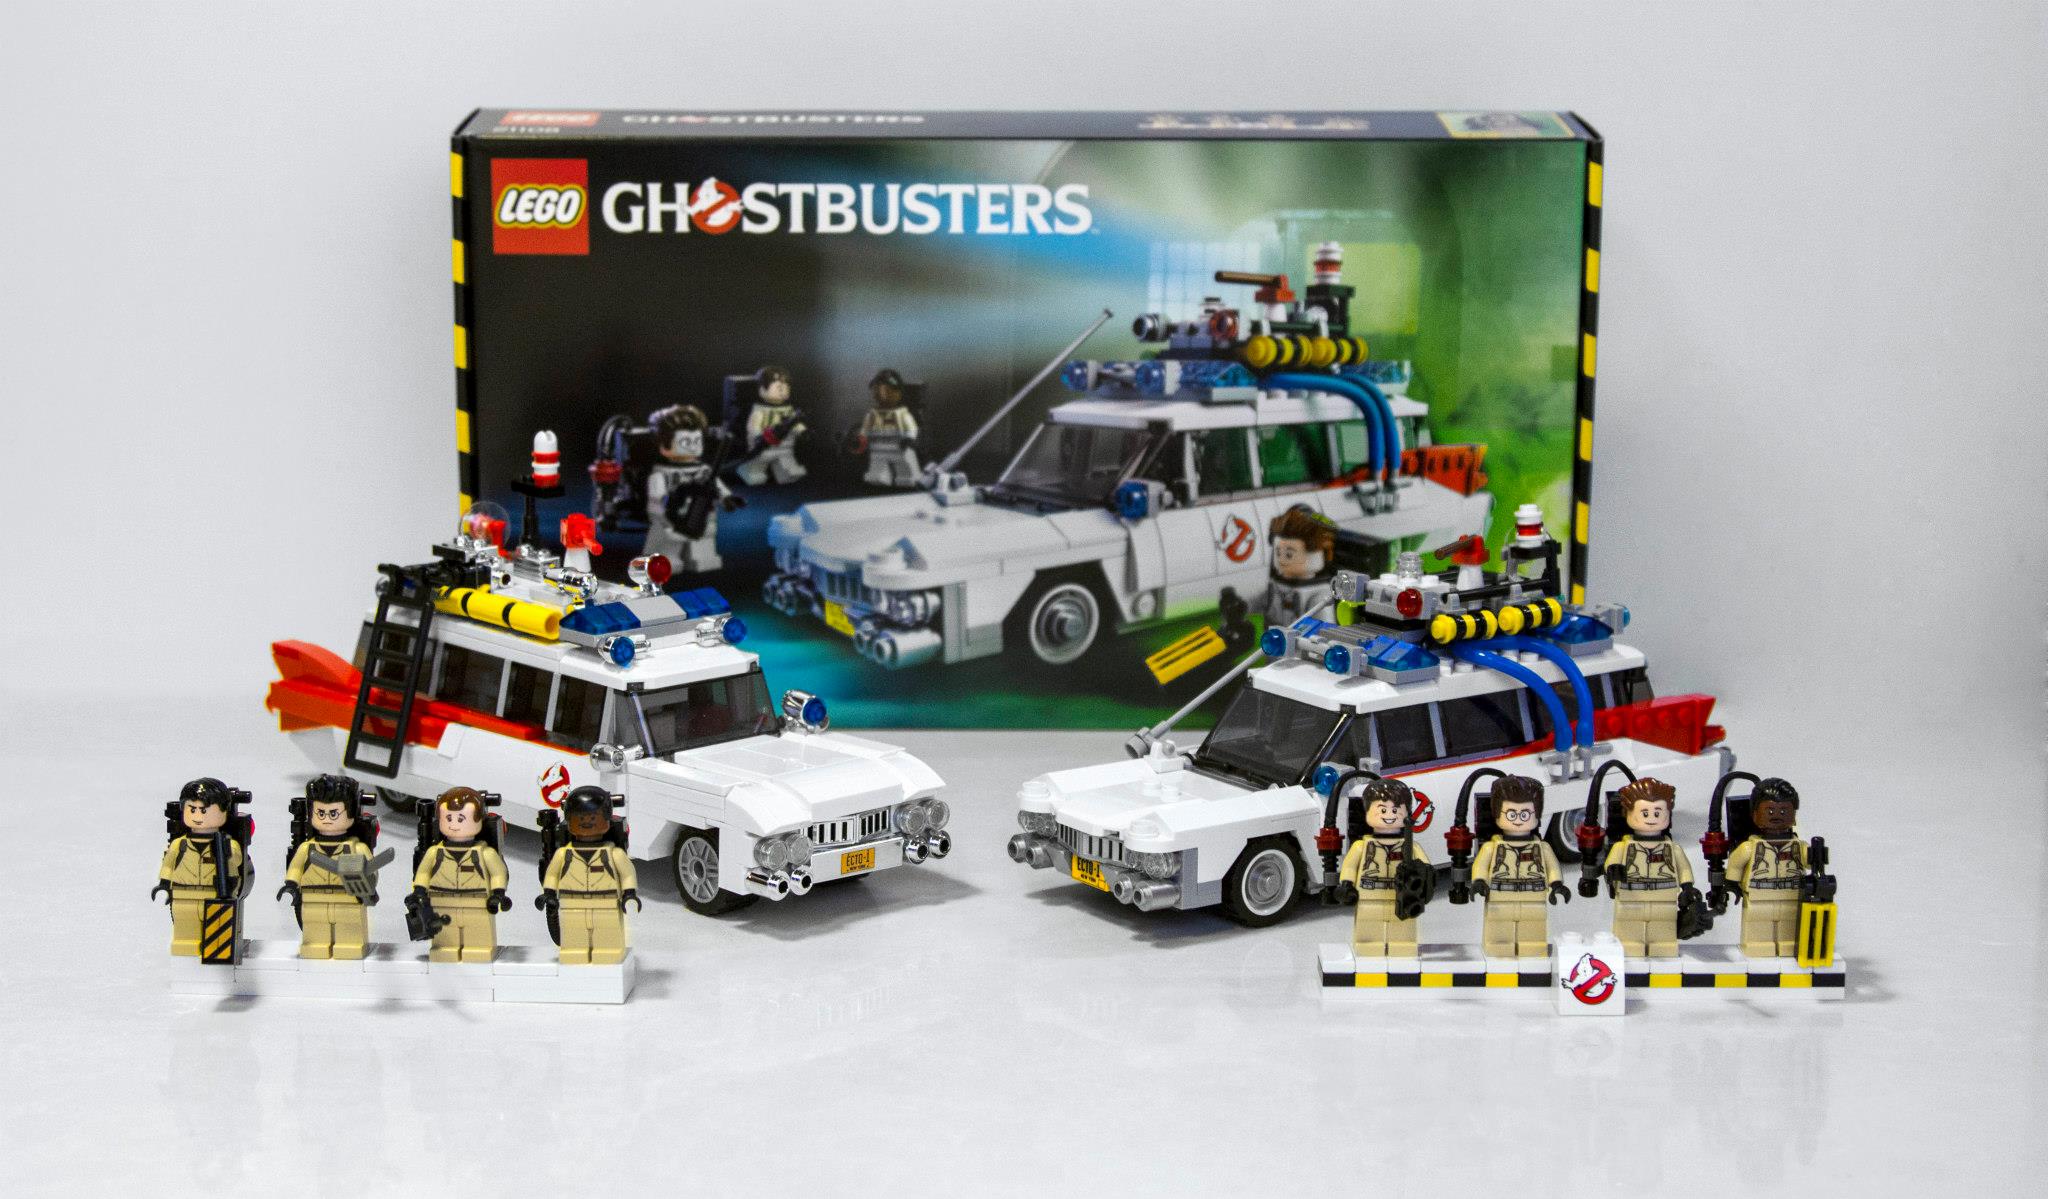 21108 LEGO Ghostbusters: A Comparisson By Brent Waller - FBTB